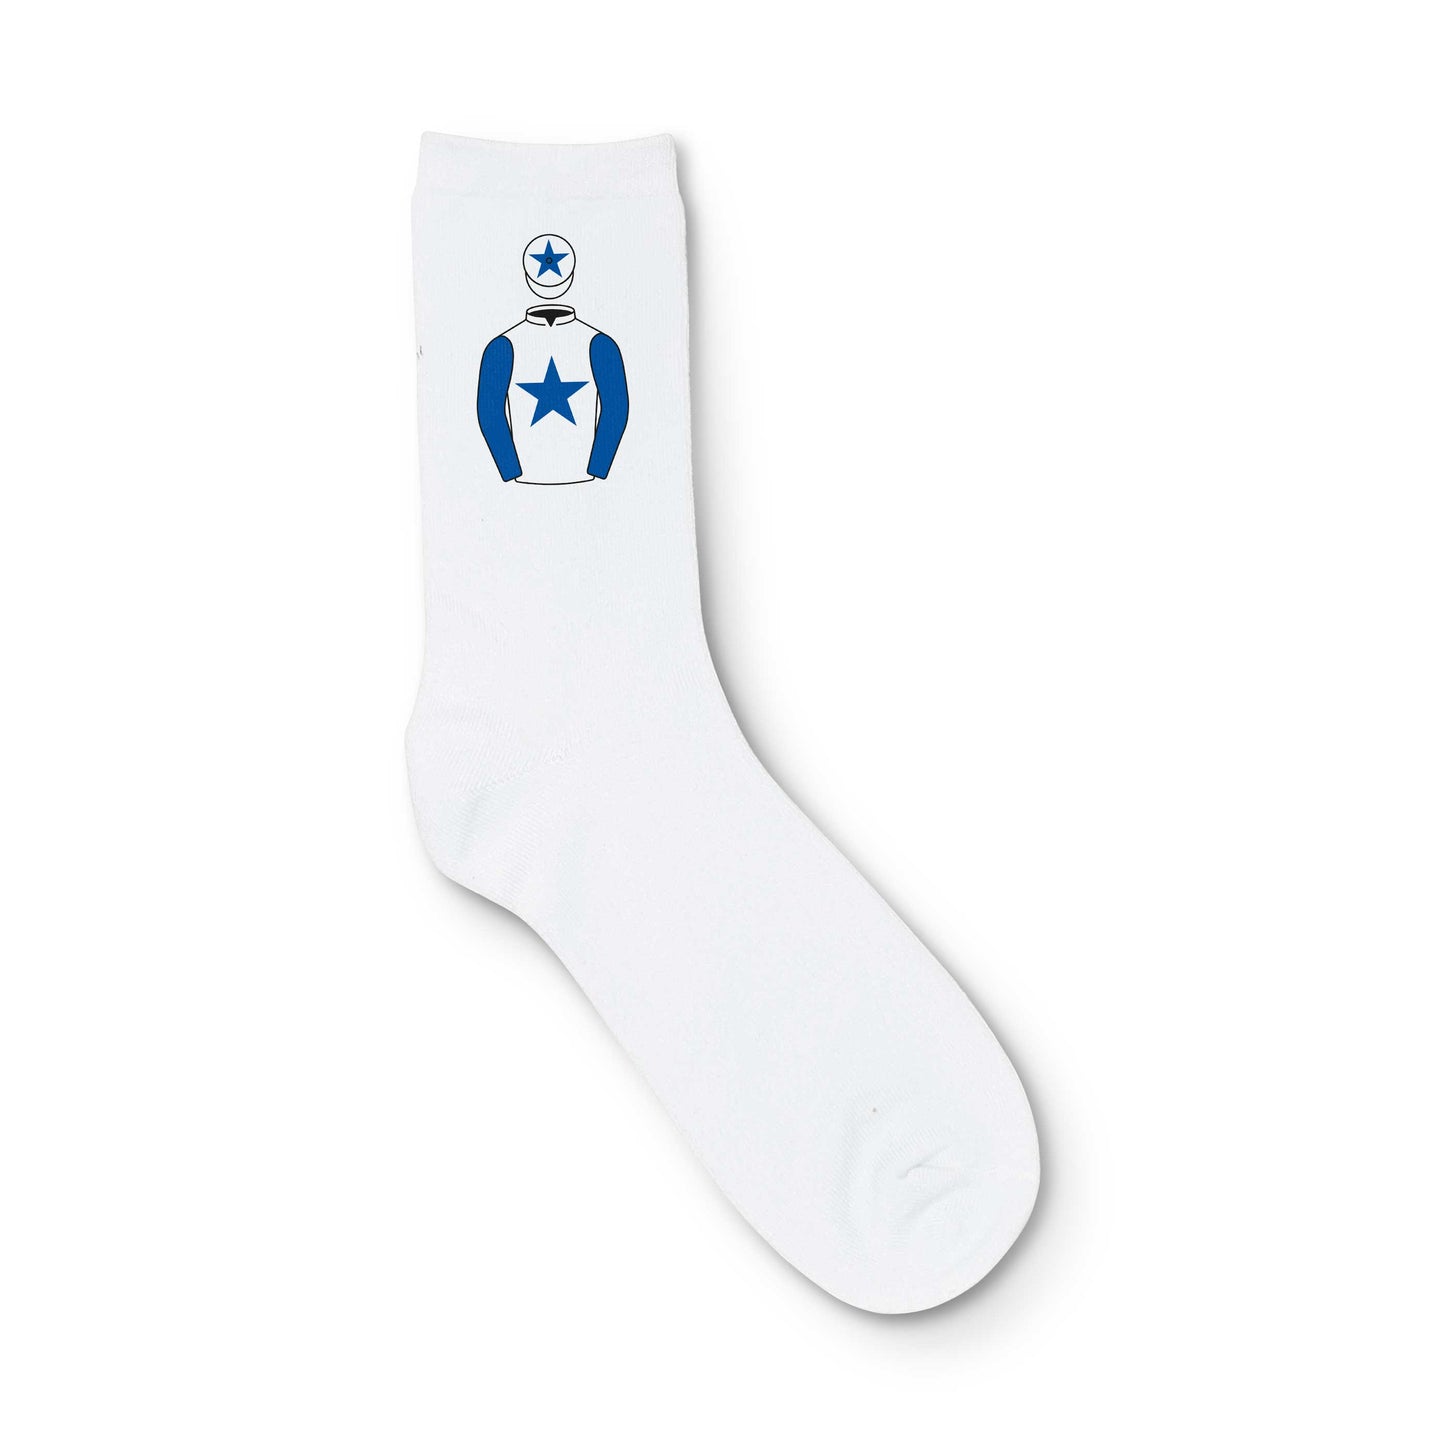 Direct Bloodstock Limited Printed Sock - Printed Sock - Hacked Up